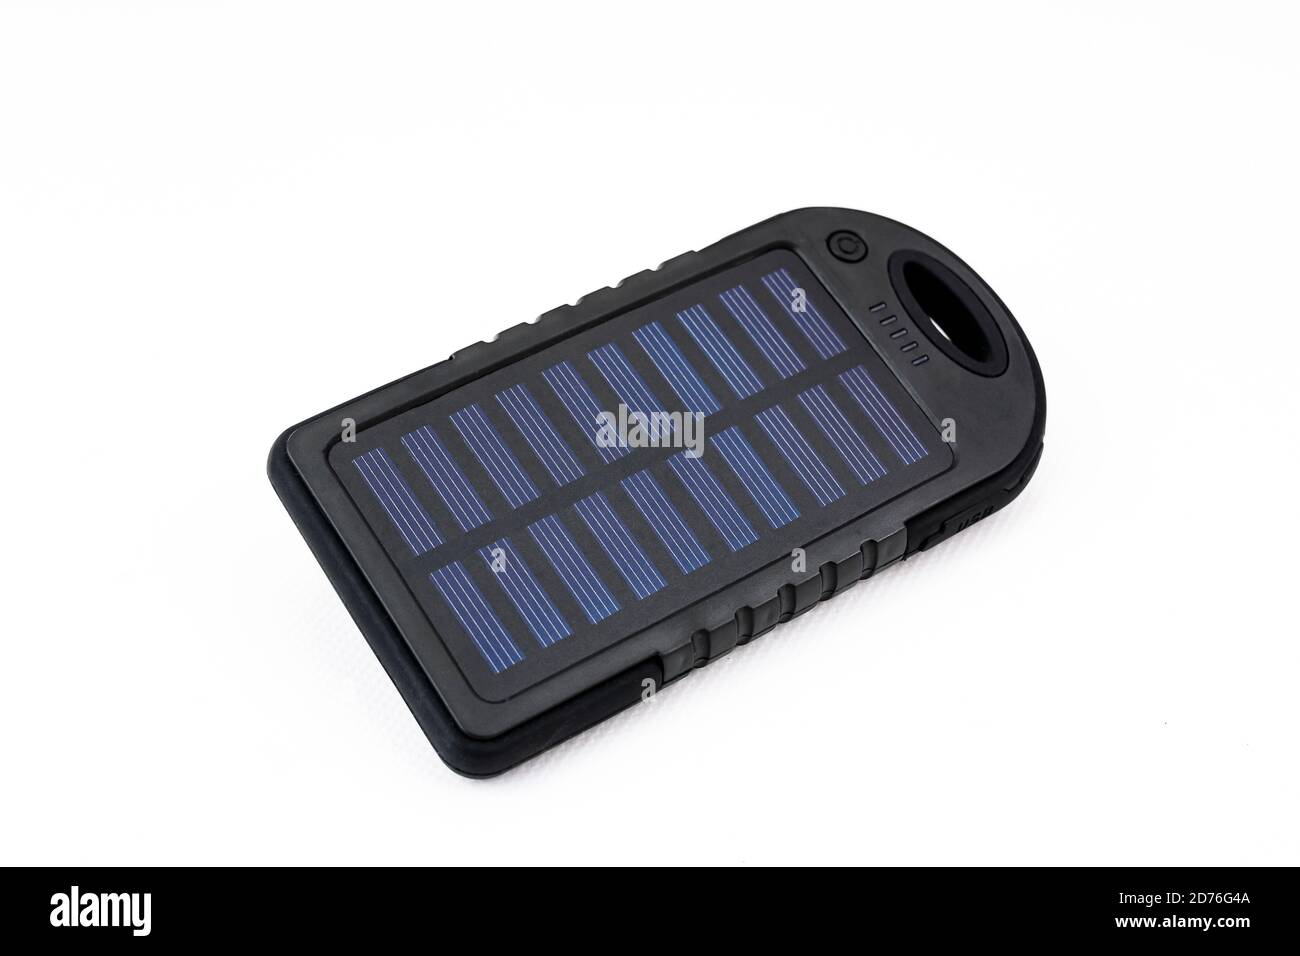 Solar energy device to recharge battery and support electronic devices Stock Photo